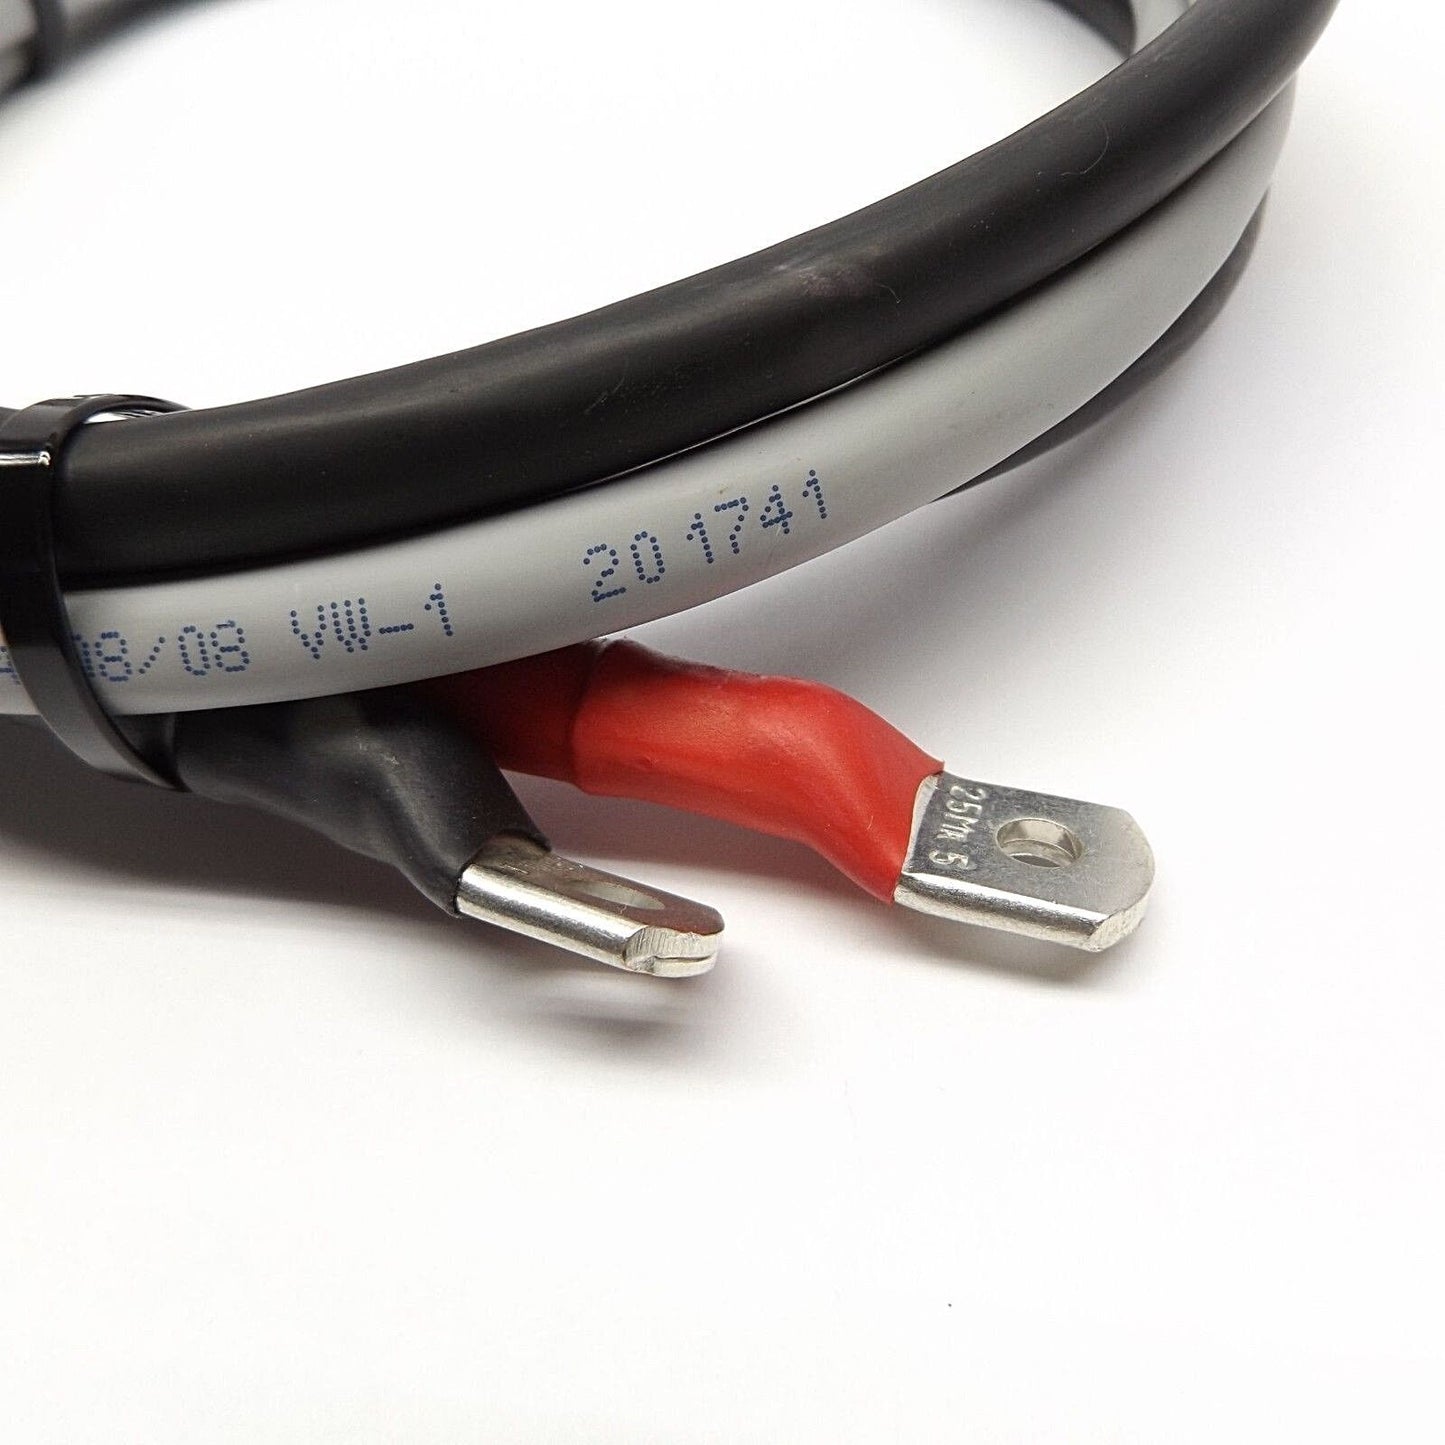 AMPHENOL  FCi 2046131/12/-W35.4 POWER CABLE 56" LONG RED & BLACK LEADS